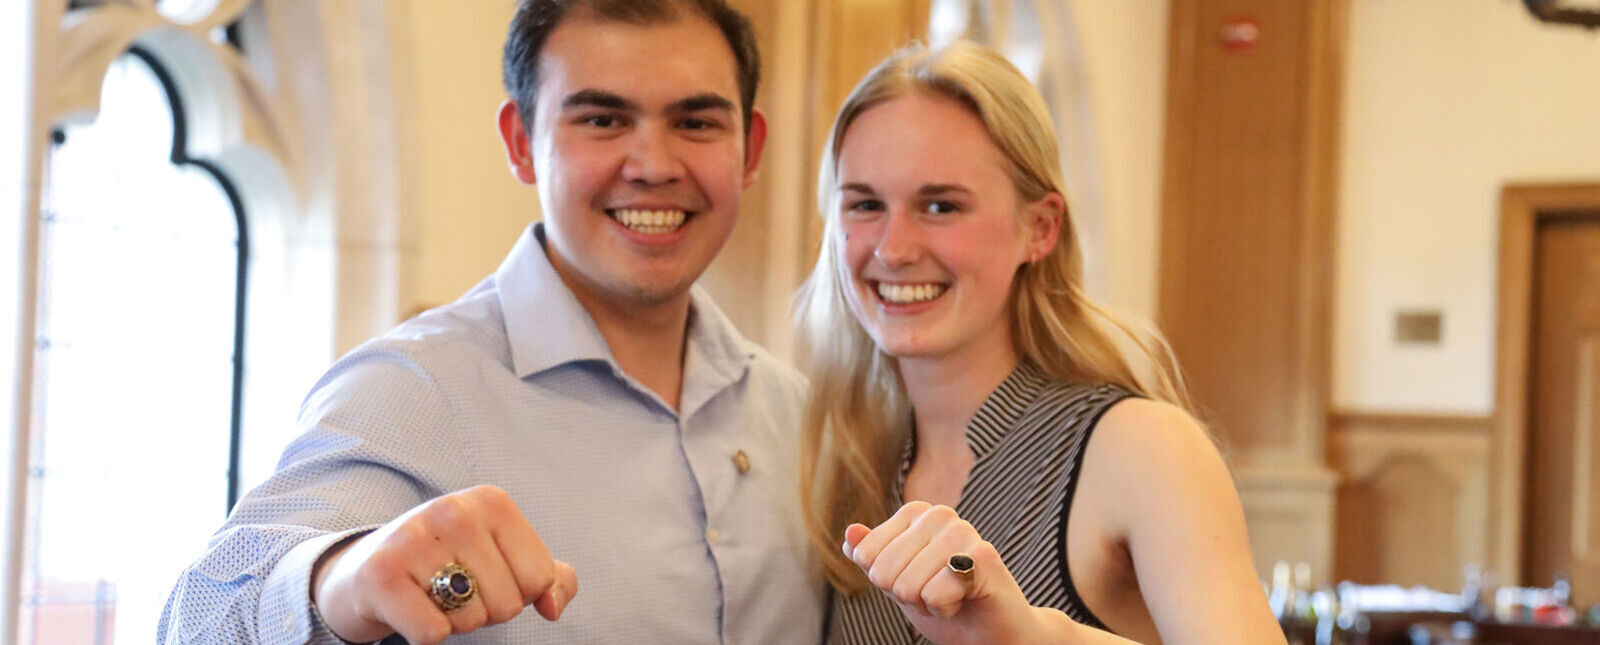 A male and female student show off their class rings